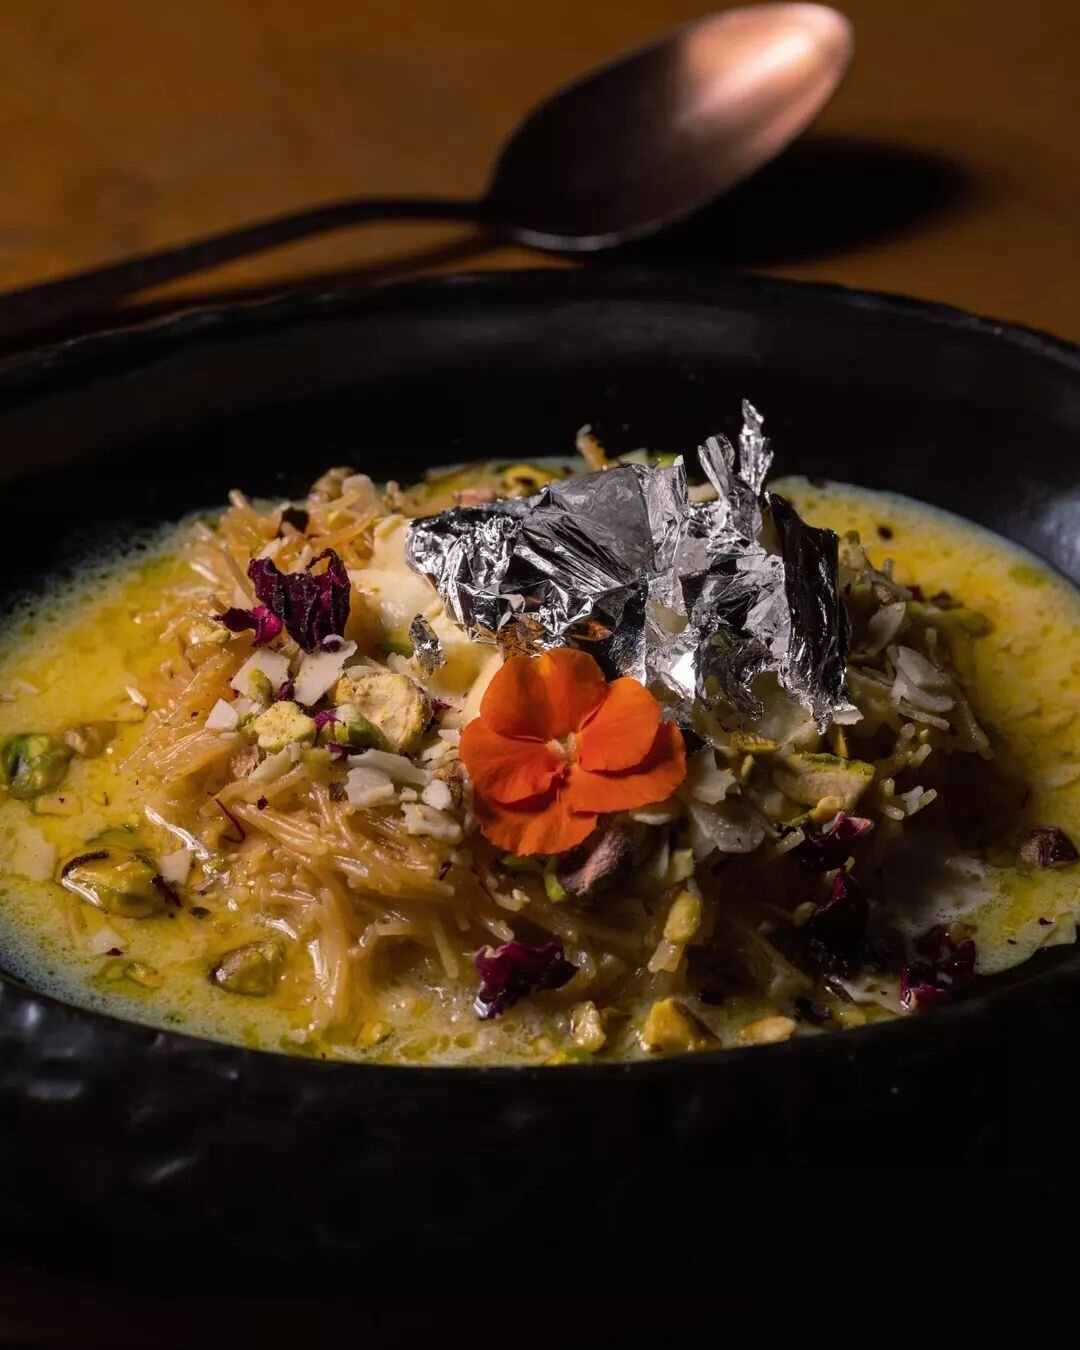 Don't miss out on dessert&nbsp;😍 

Try our colourful Savai Ka Ghosla (literally translates to vermicelli nest), a dish inspired by the Mughal Era made with roasted vermicelli, saffron milk, thandai cream and toasted nuts.